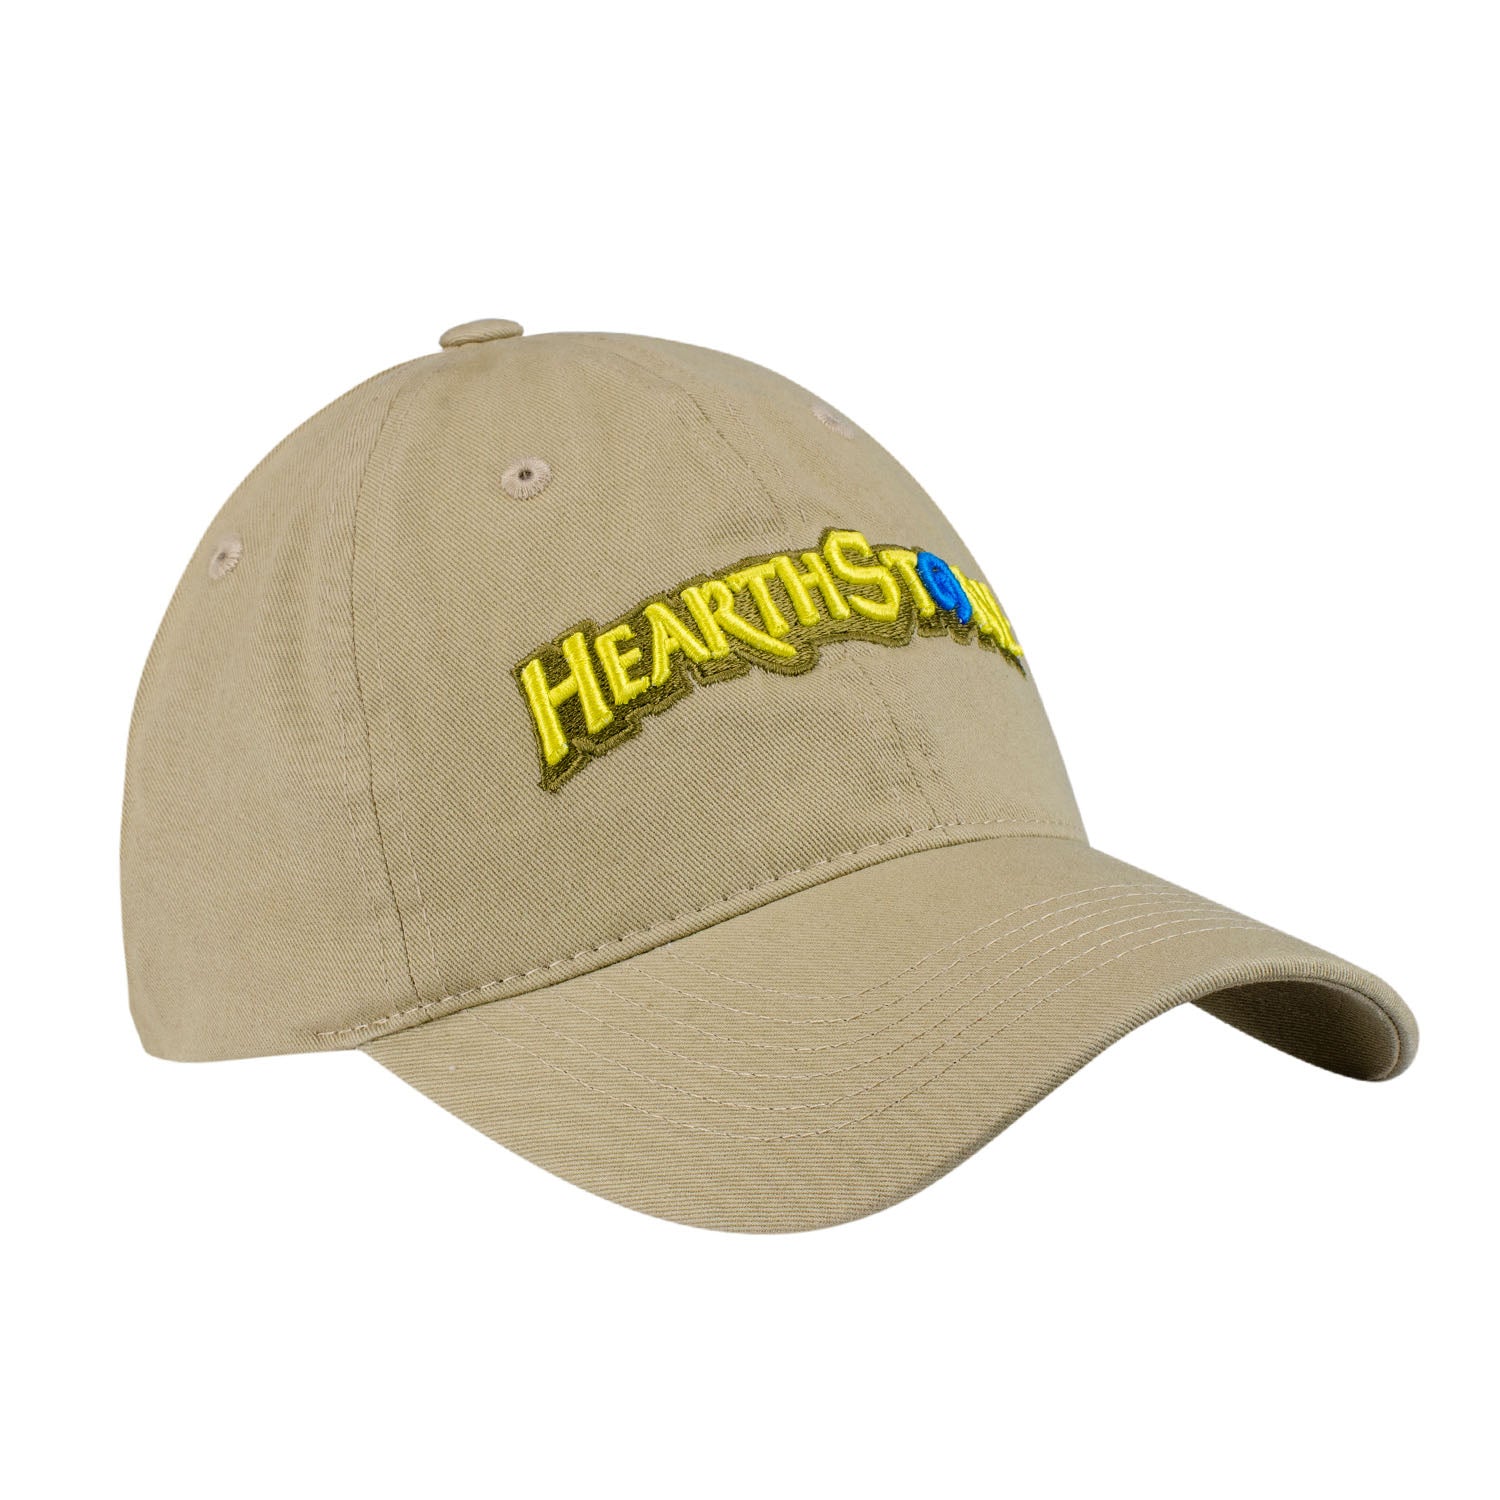 Hearthstone Tan Dad Hat - Right View